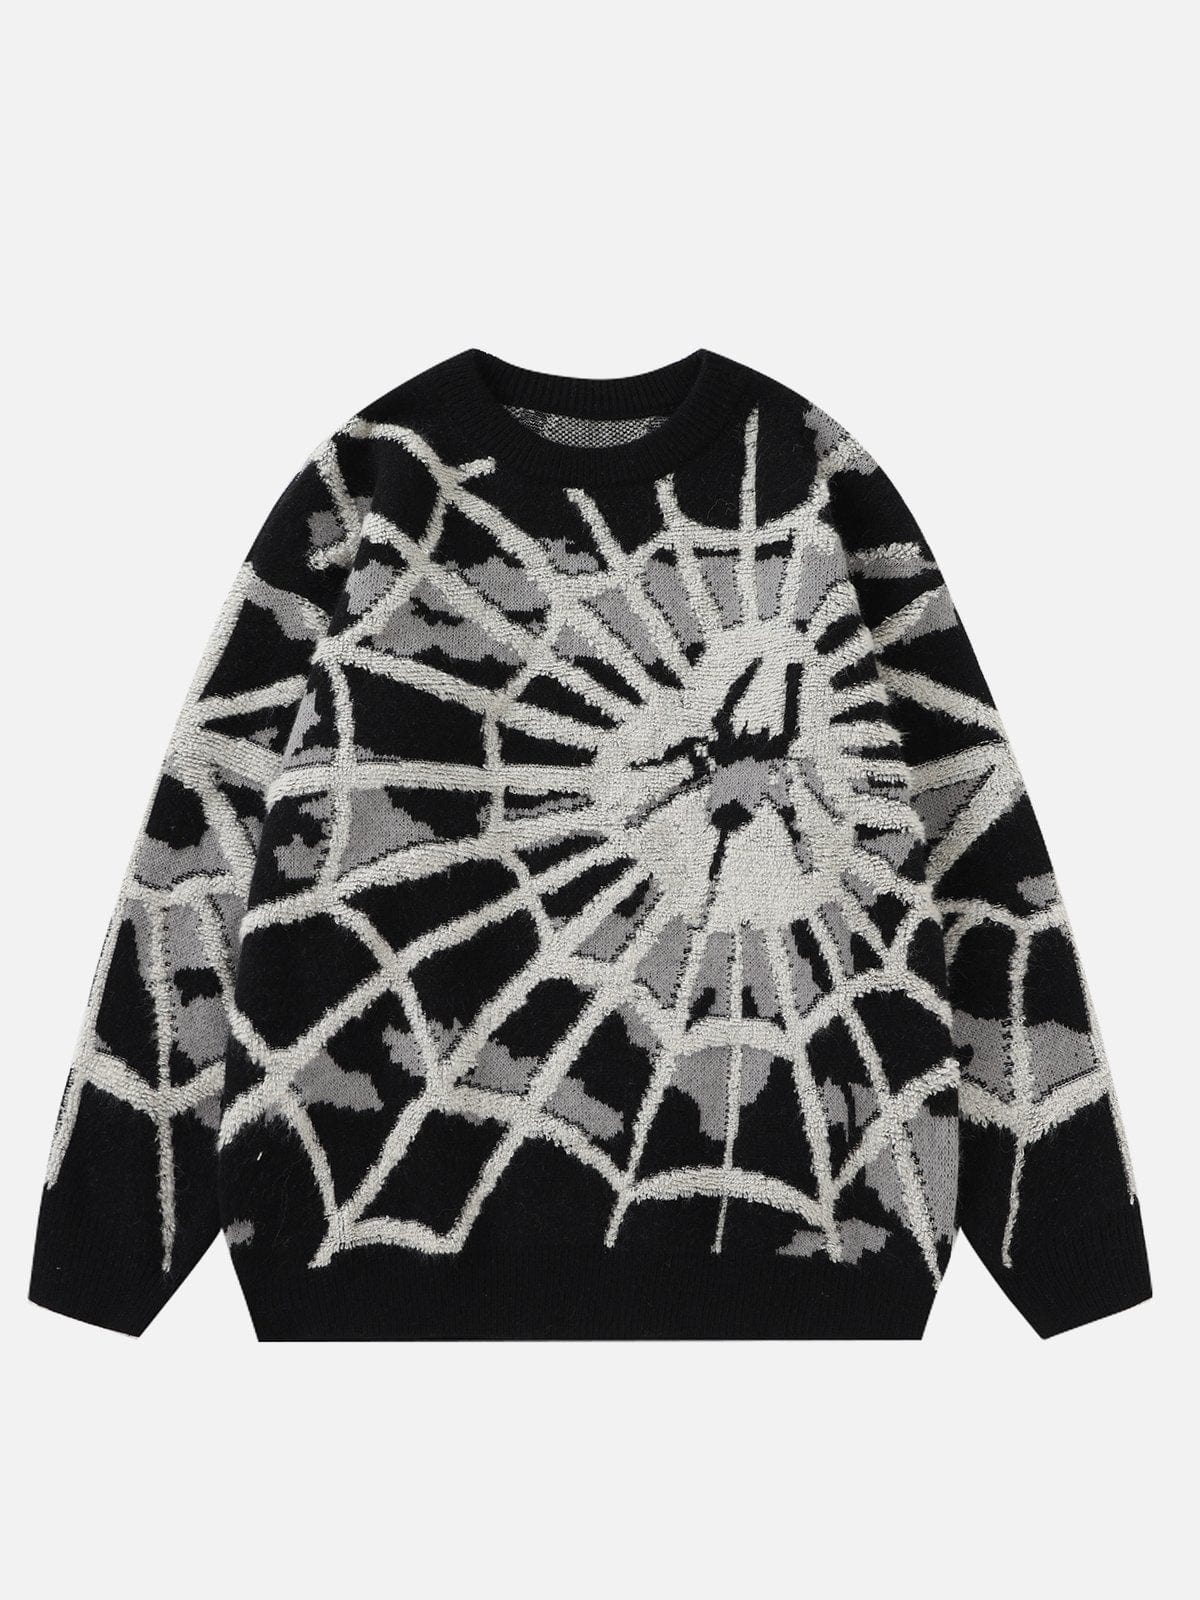 NEV Fleece Spider Web Crafted Sweater